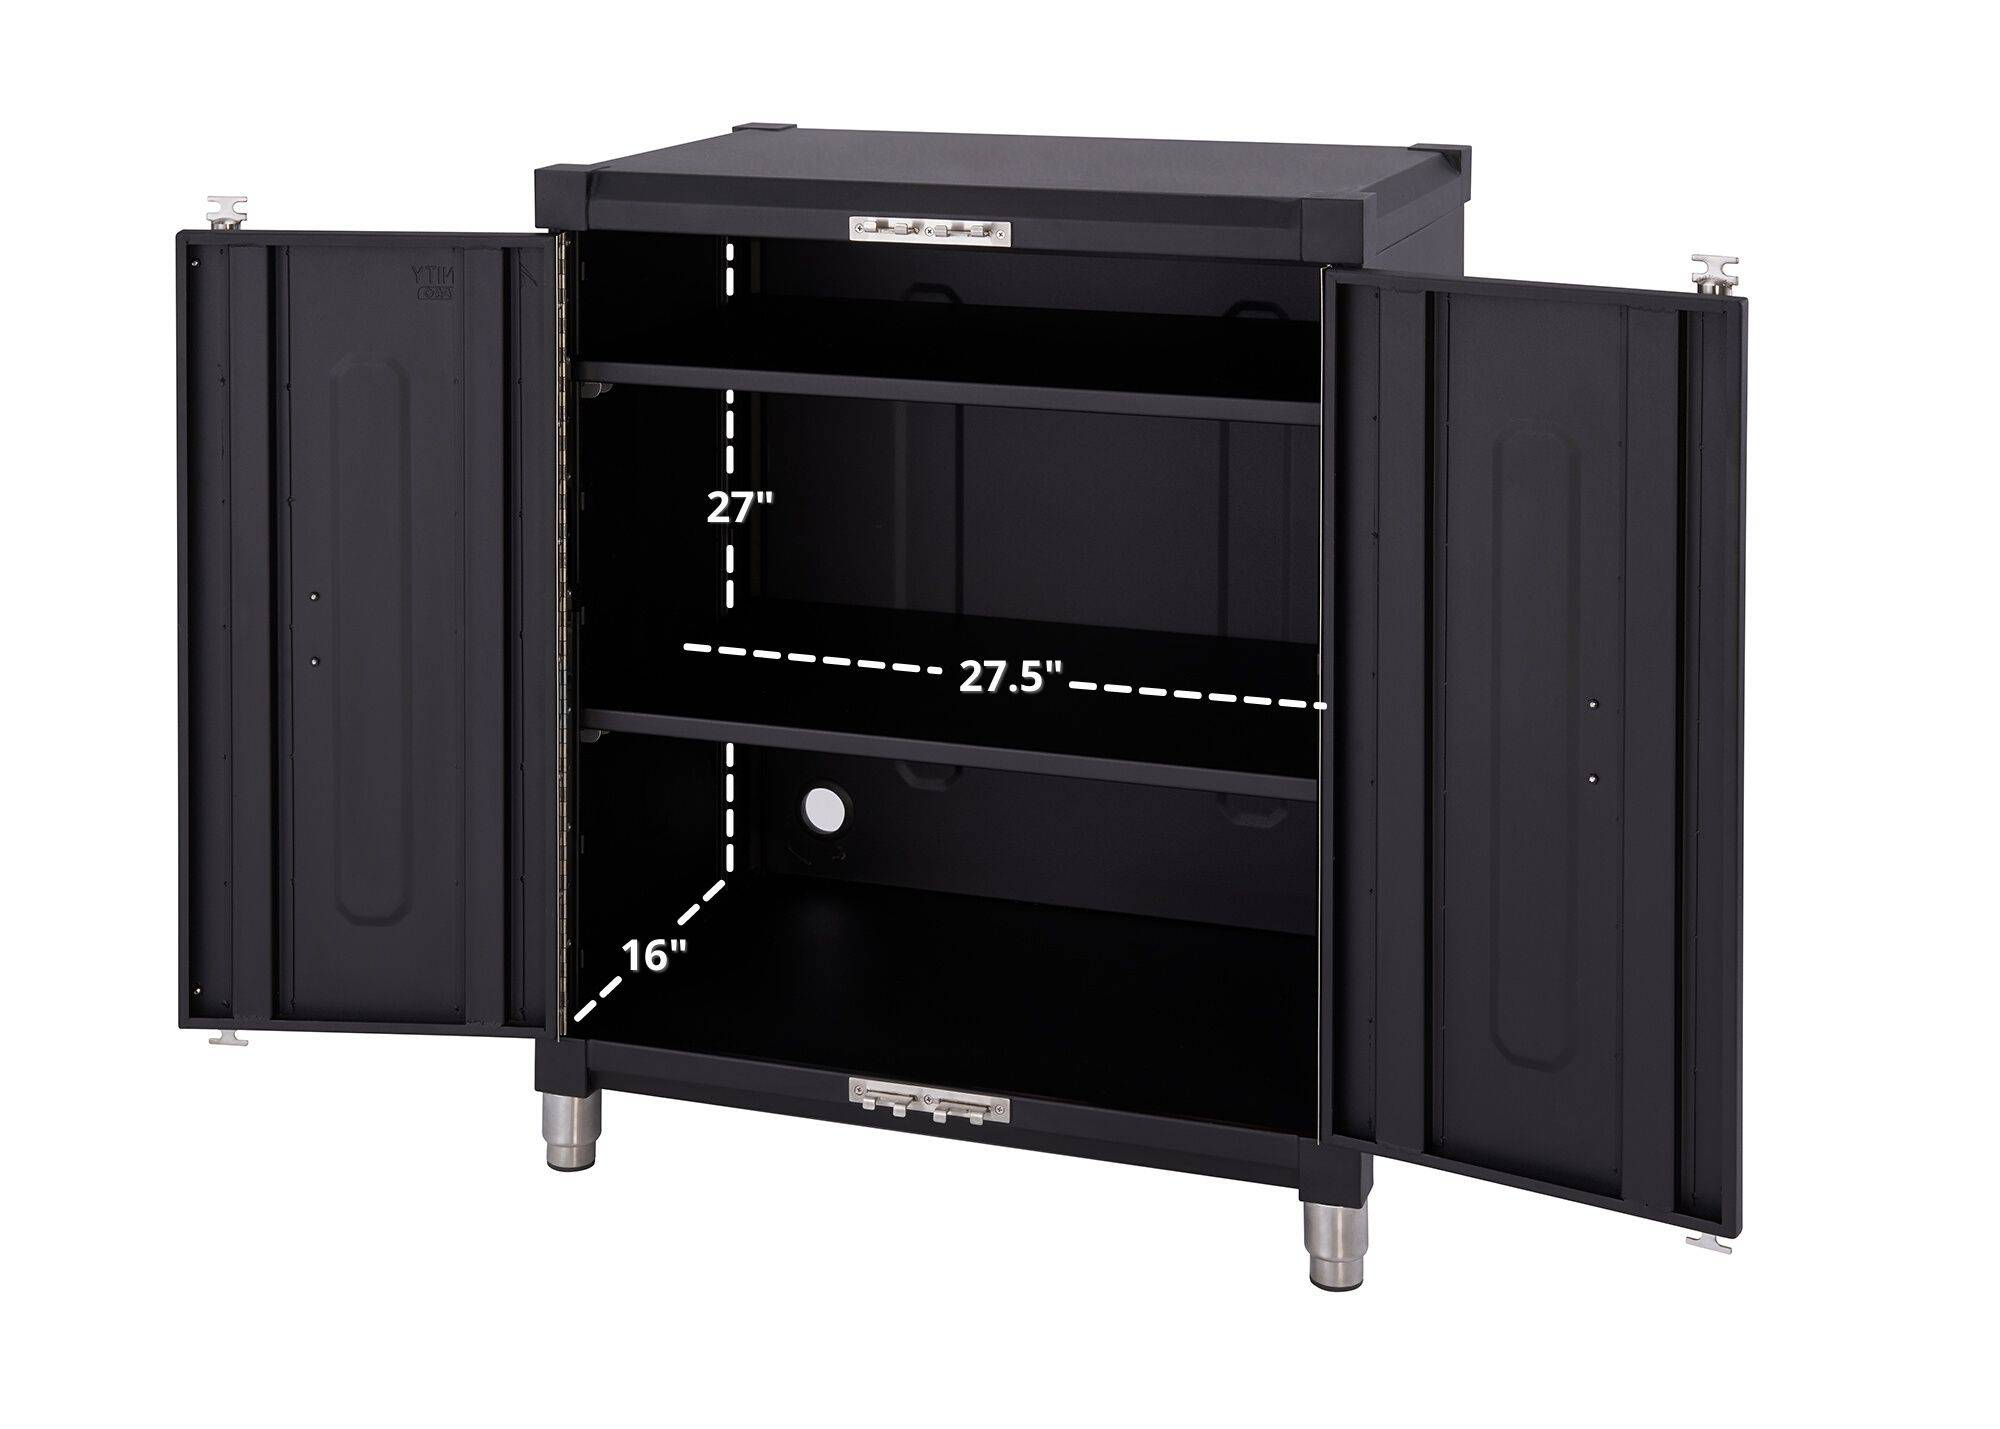 27.5 inches wide by 16 inches deep by 27 inches tall base cabinet interior dimensions